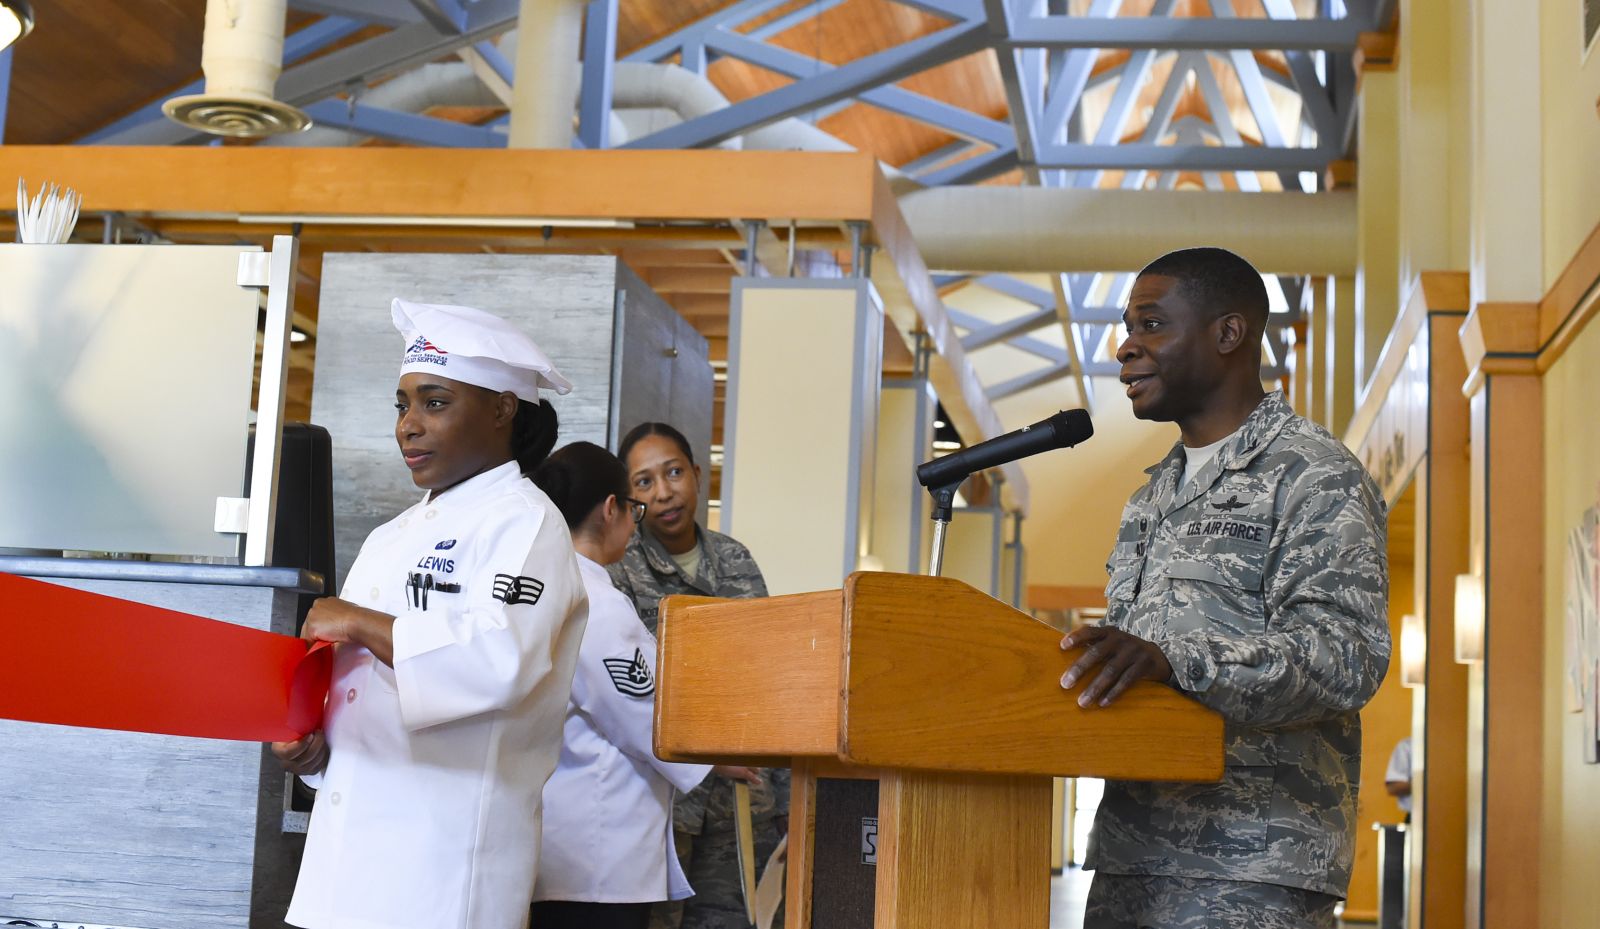 The Gaylor Dining Facility opened last week after $2.4 million in repairs and renovations. (Photo/Joint Base Charleston)